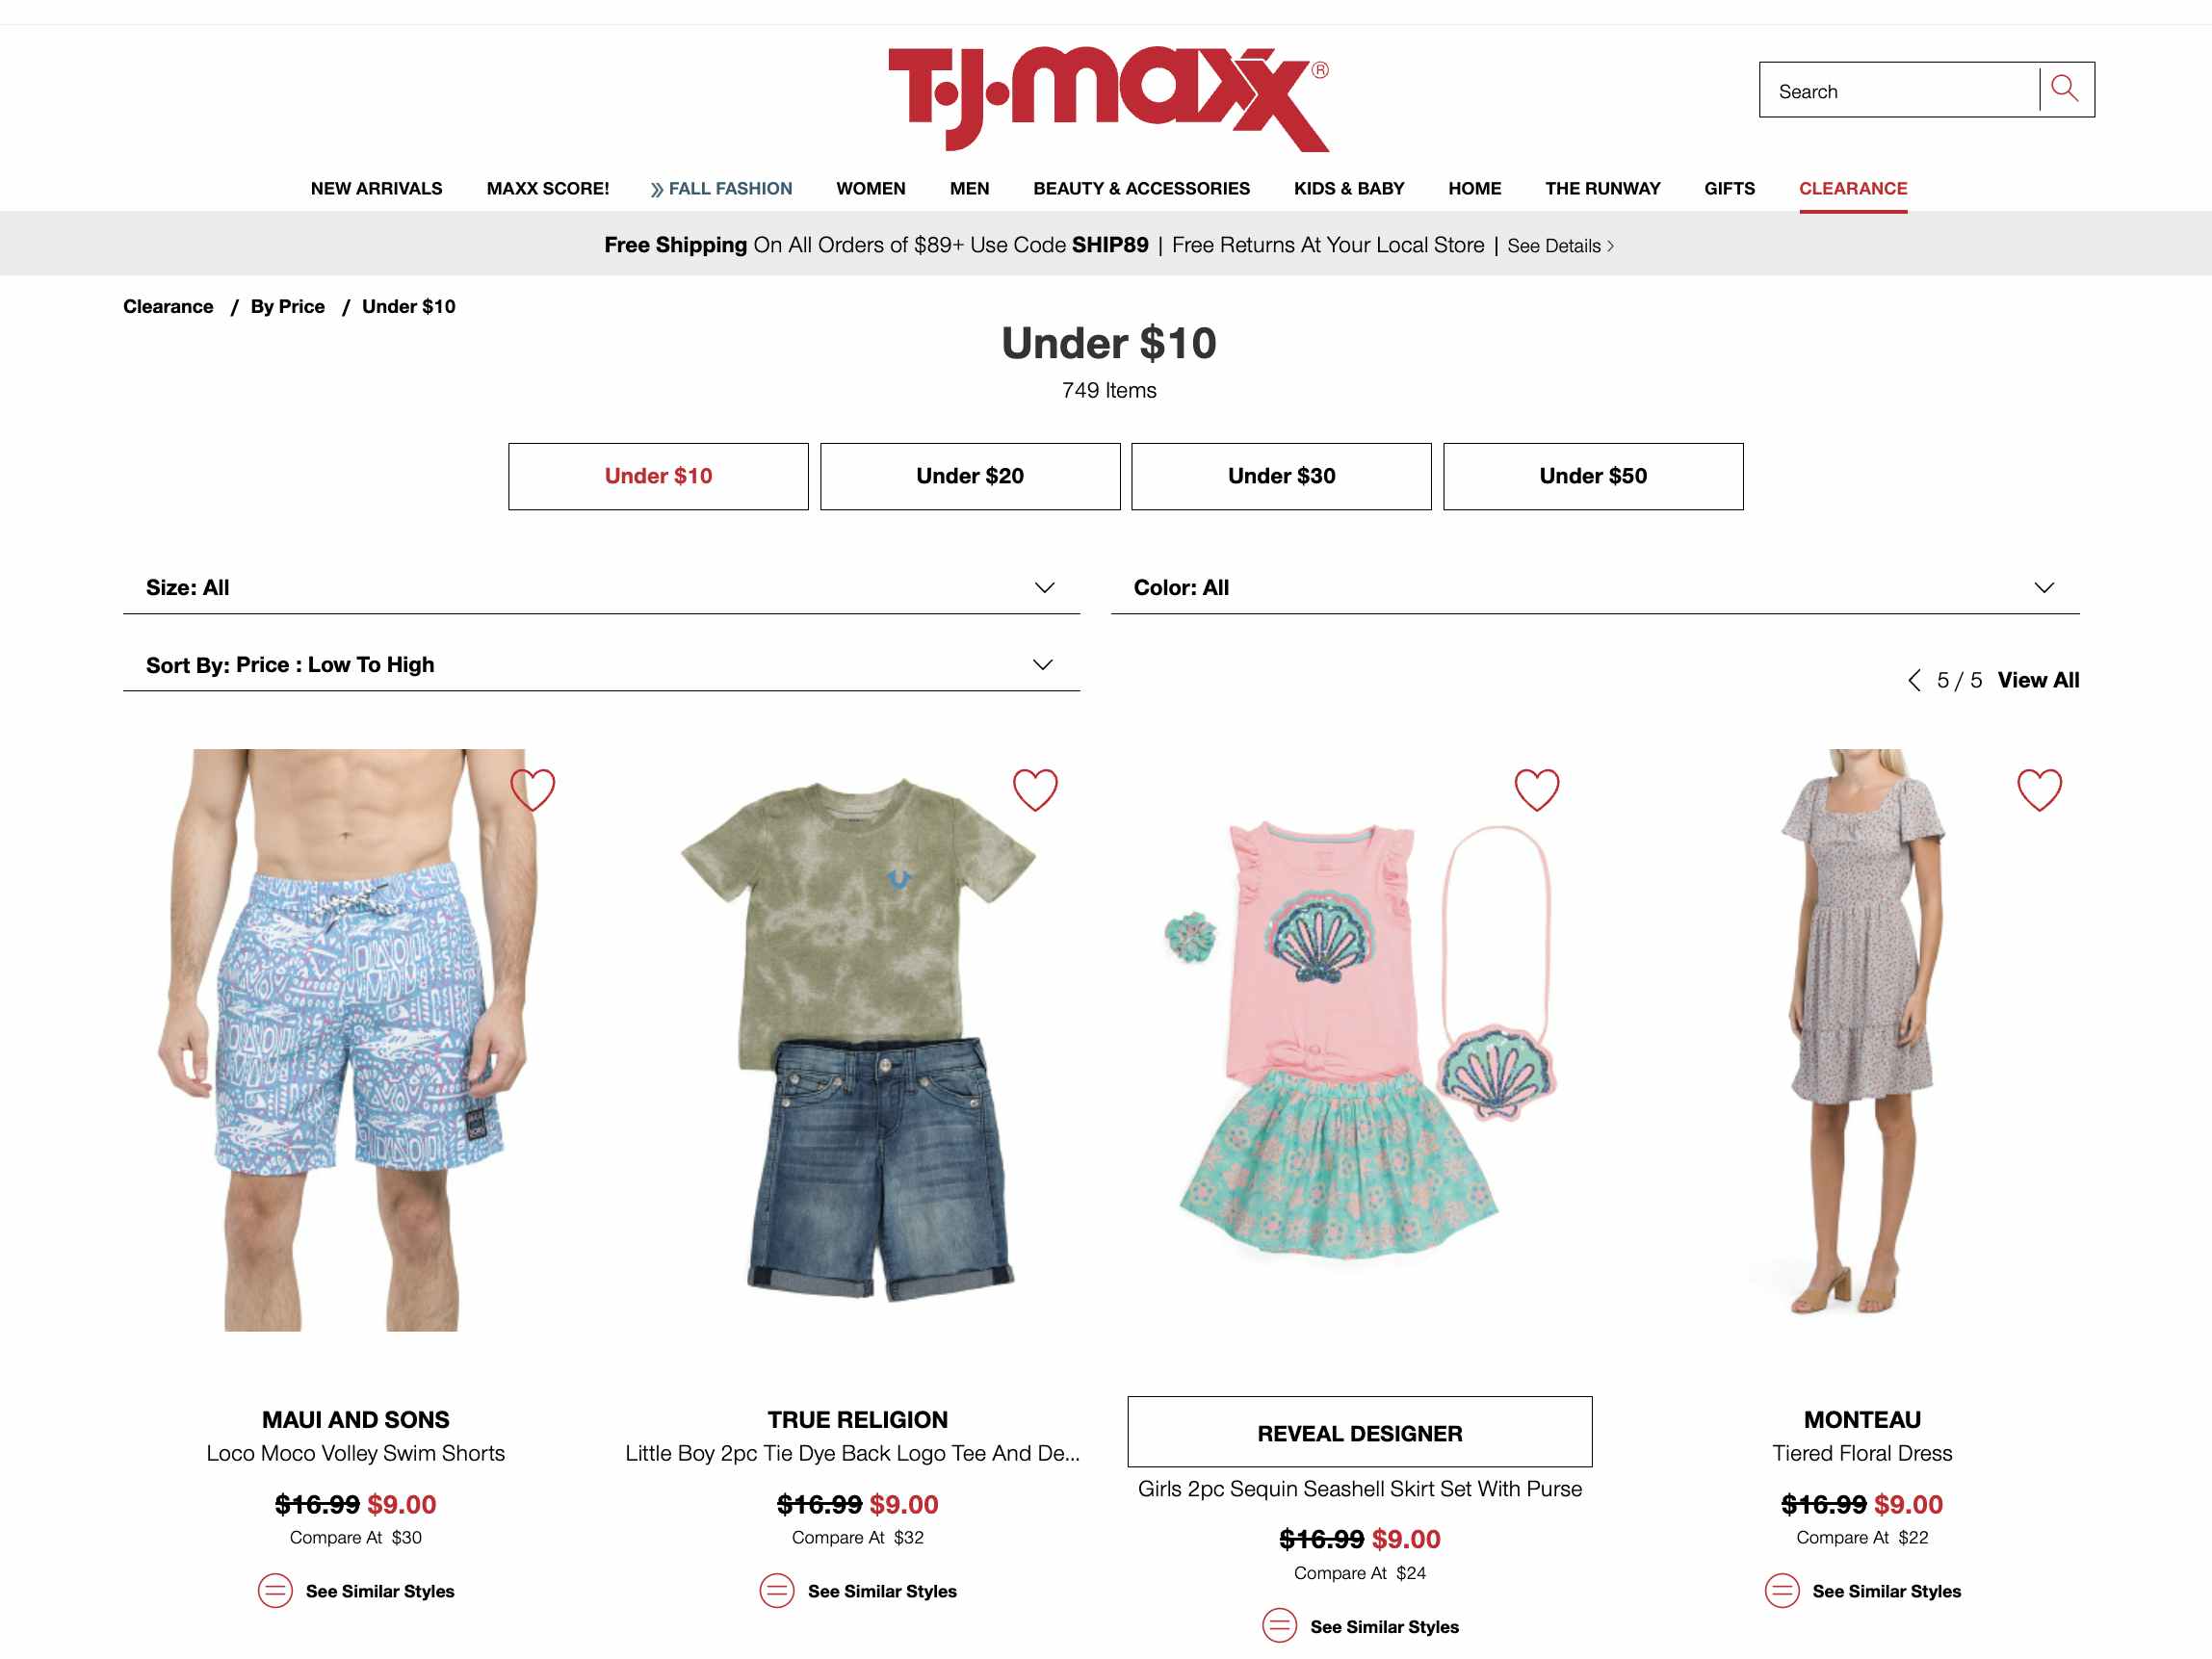 T.J.Maxx - Online only! Clearance under $10, $20, and $30.